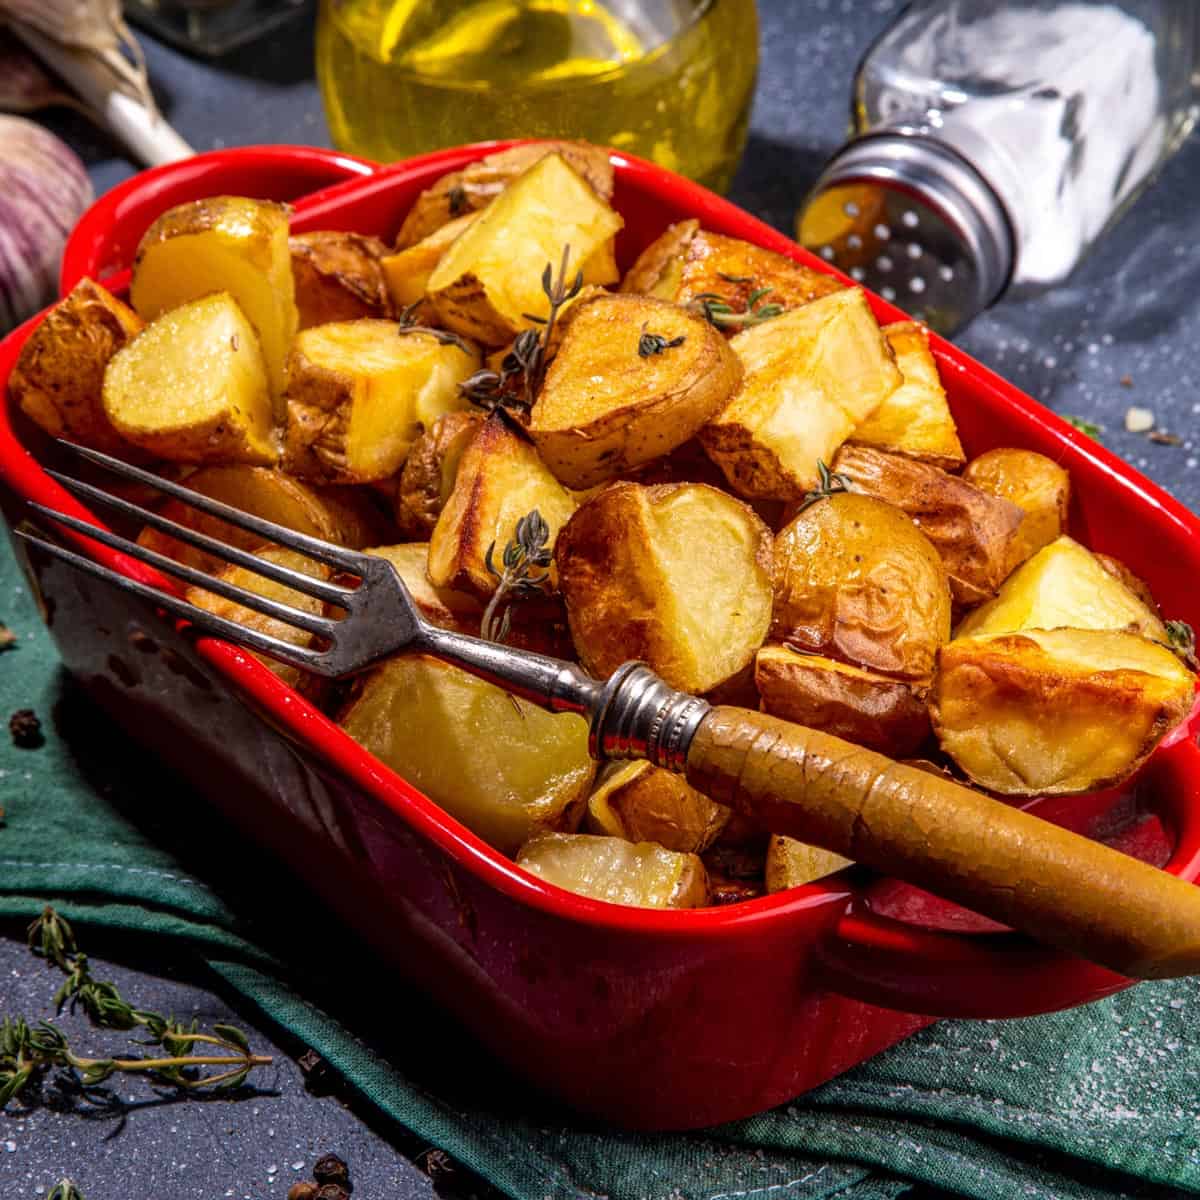 A red pan of roasted potatoes.